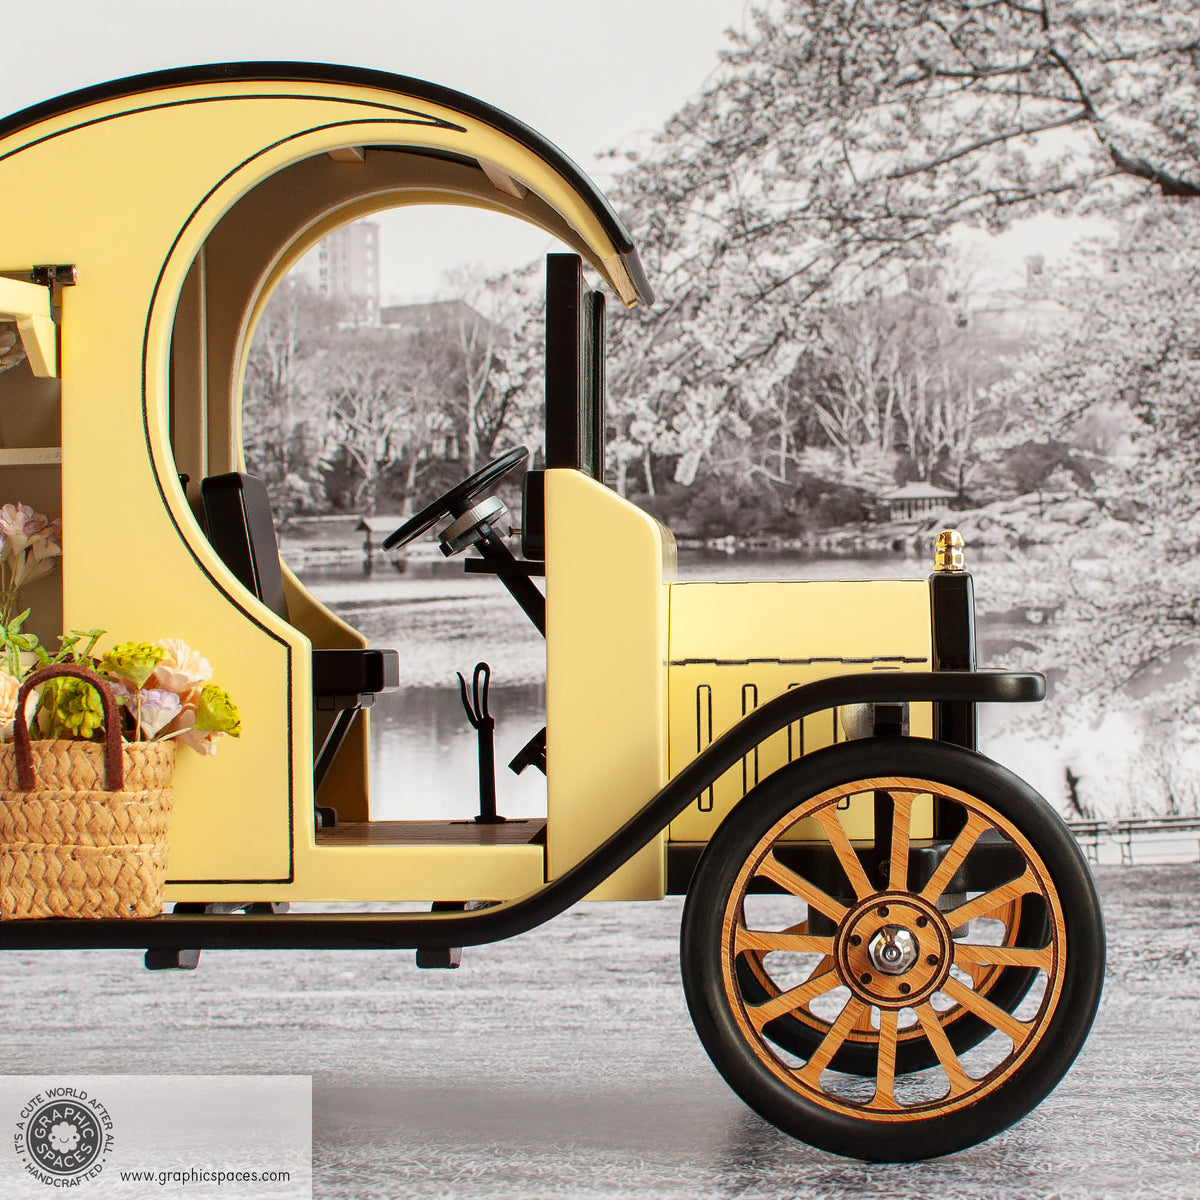 1:12 Scale Room Box Yellow Flower Shop Truck Model T C Cab. Passenger front side view with seat, brake and steering wheel.